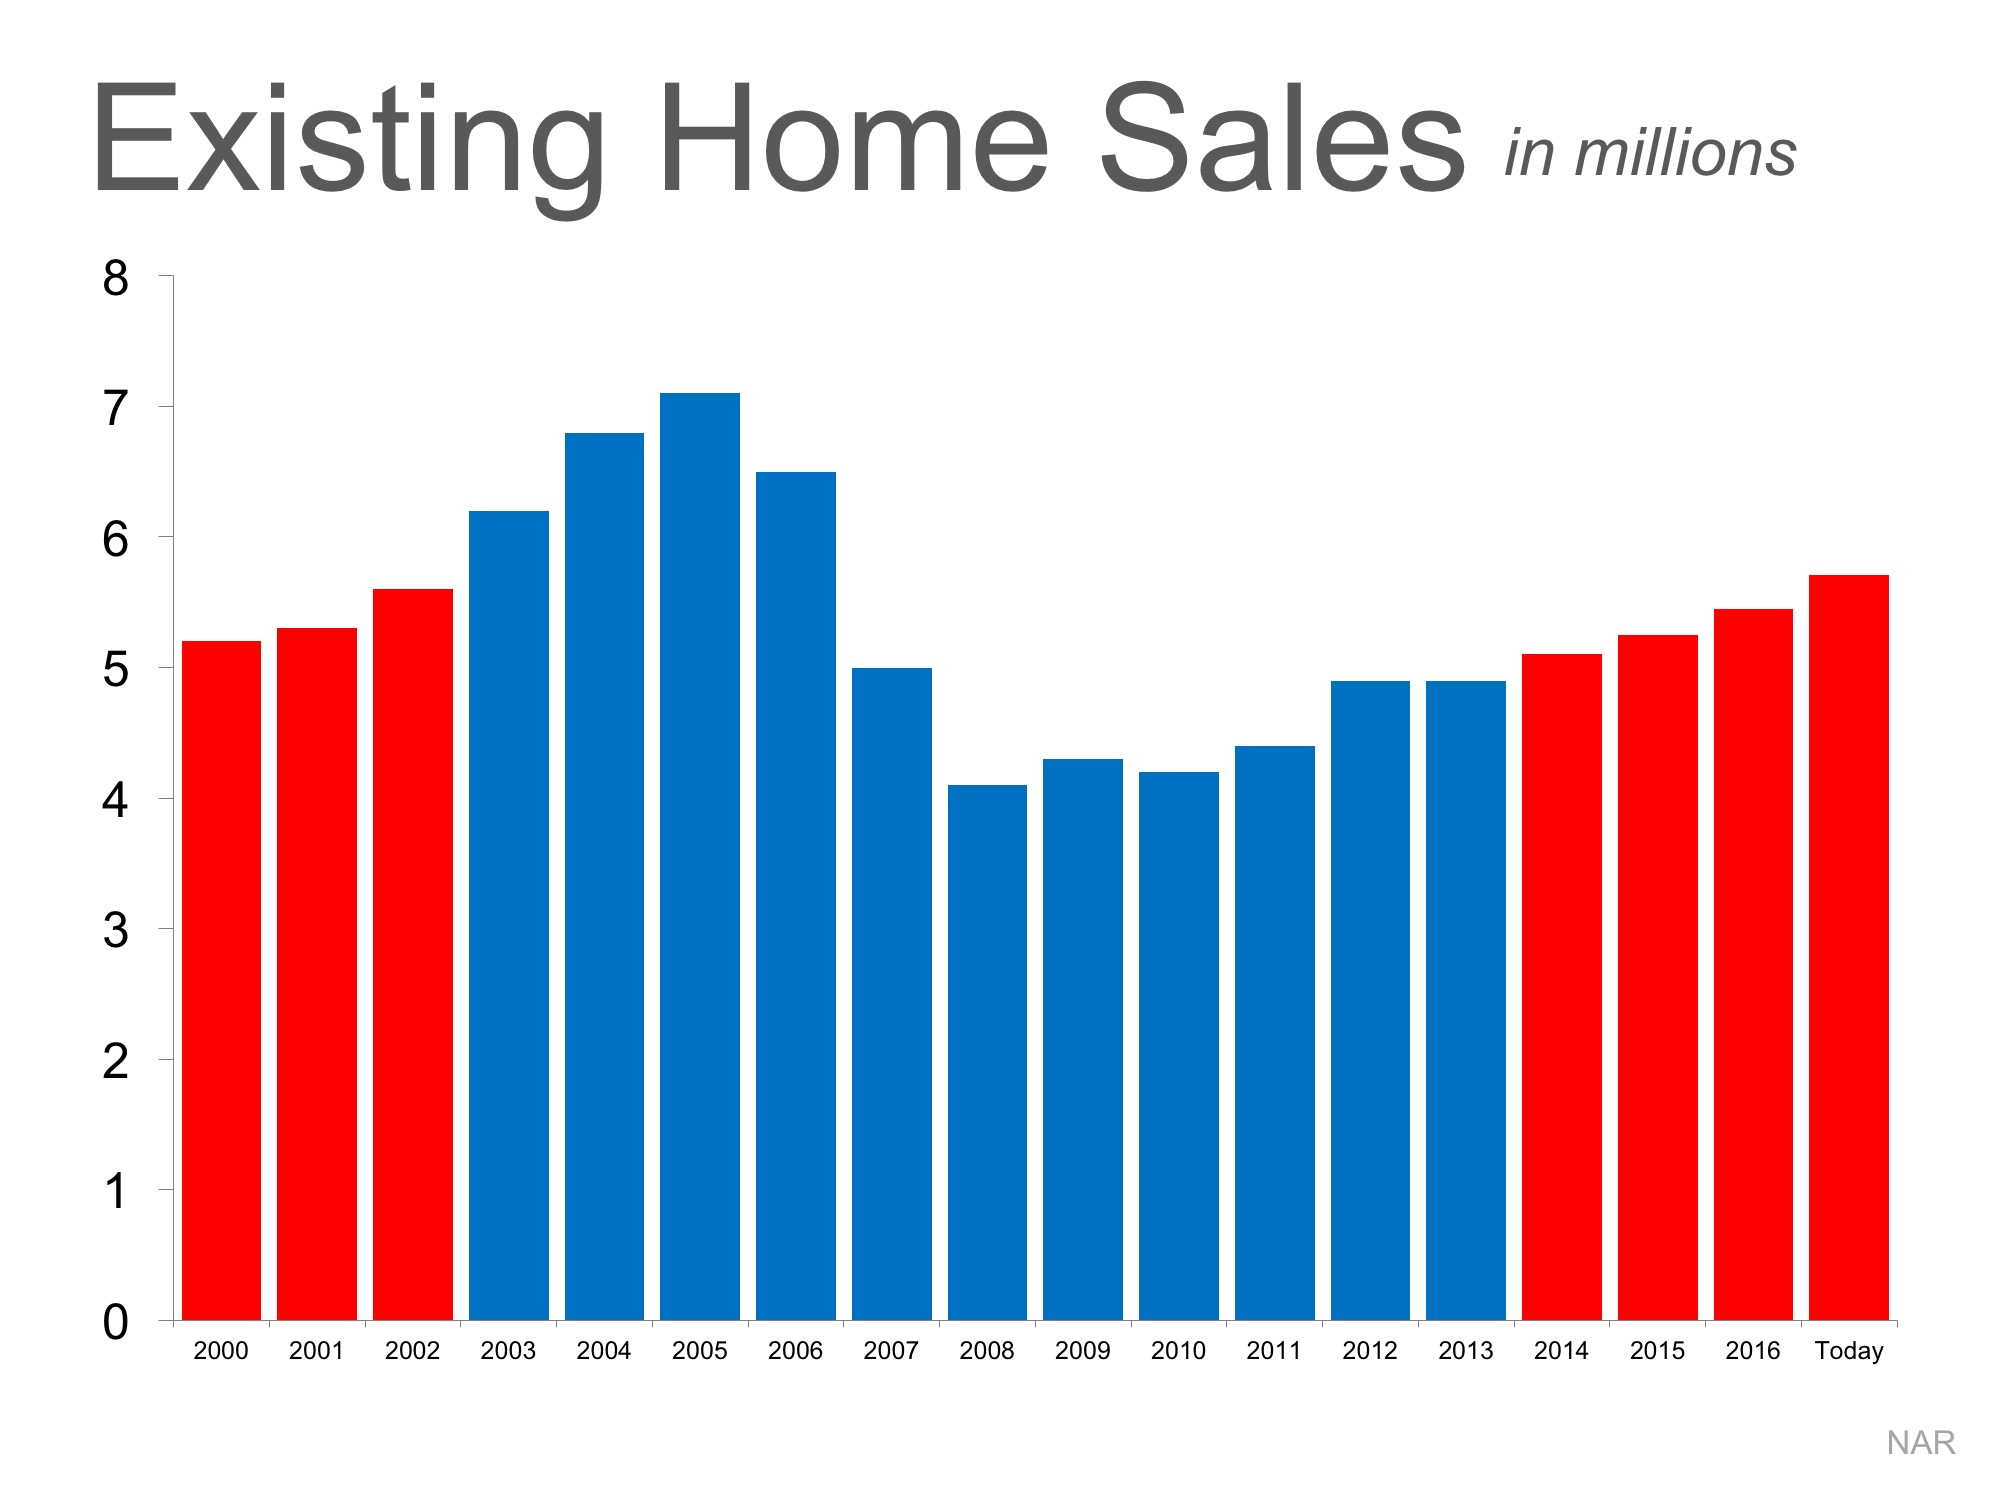 Is the Current Pace of Home Sales Maintainable? | MyKCM